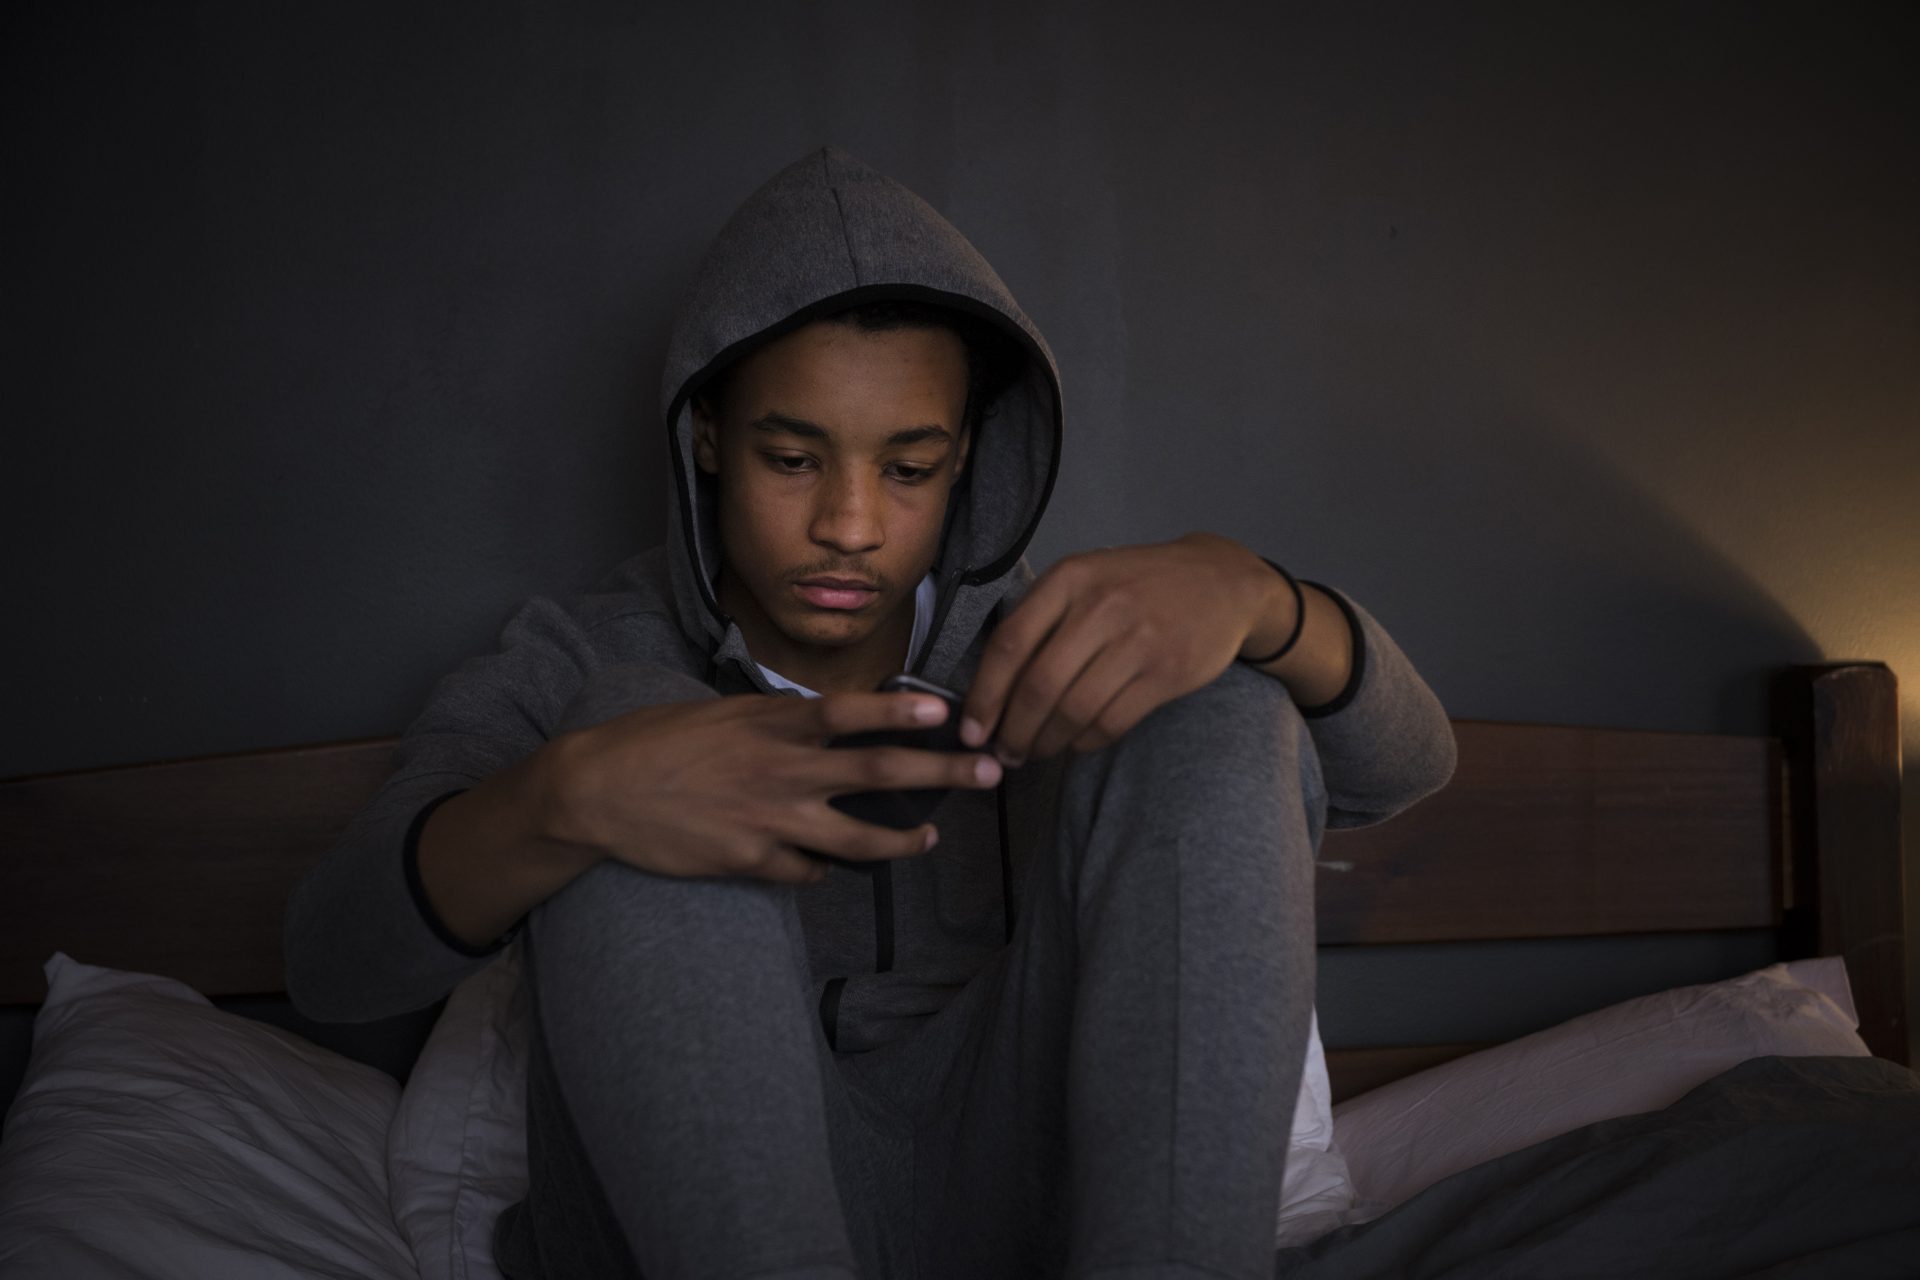 Smartphones can cause anxiety and depression